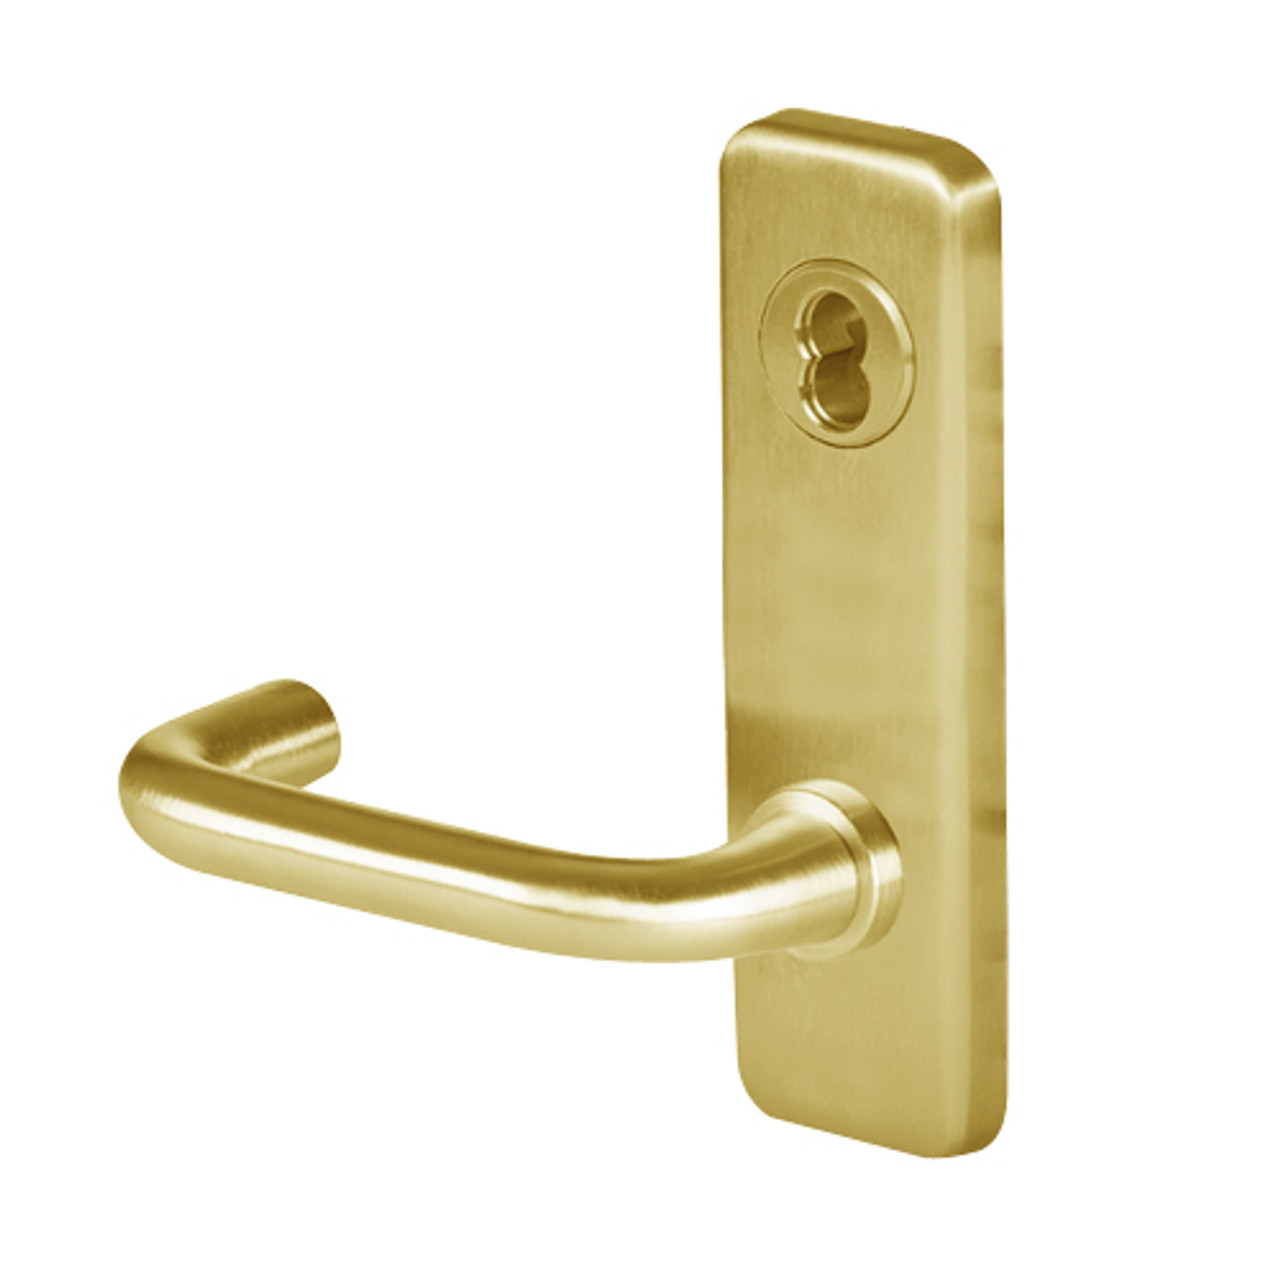 45H0LT3J606 Best 40H Series Privacy Heavy Duty Mortise Lever Lock with Solid Tube Return Style in Satin Brass